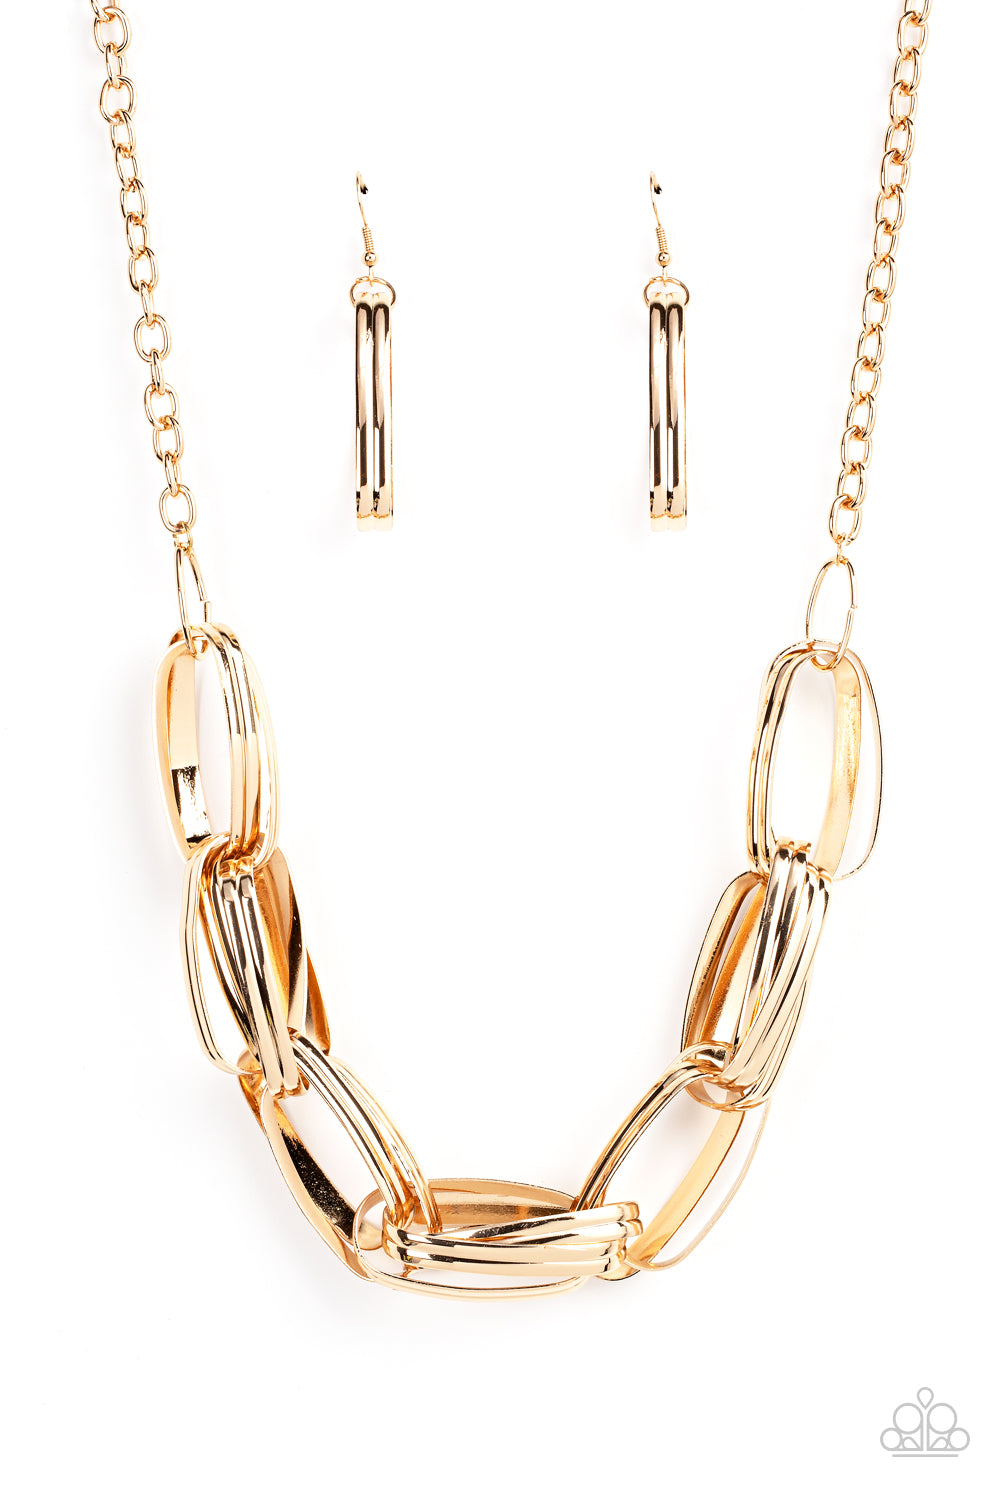 Paparazzi Accessories - Fiercely Flexing #N663 Box 7 - Gold Necklace